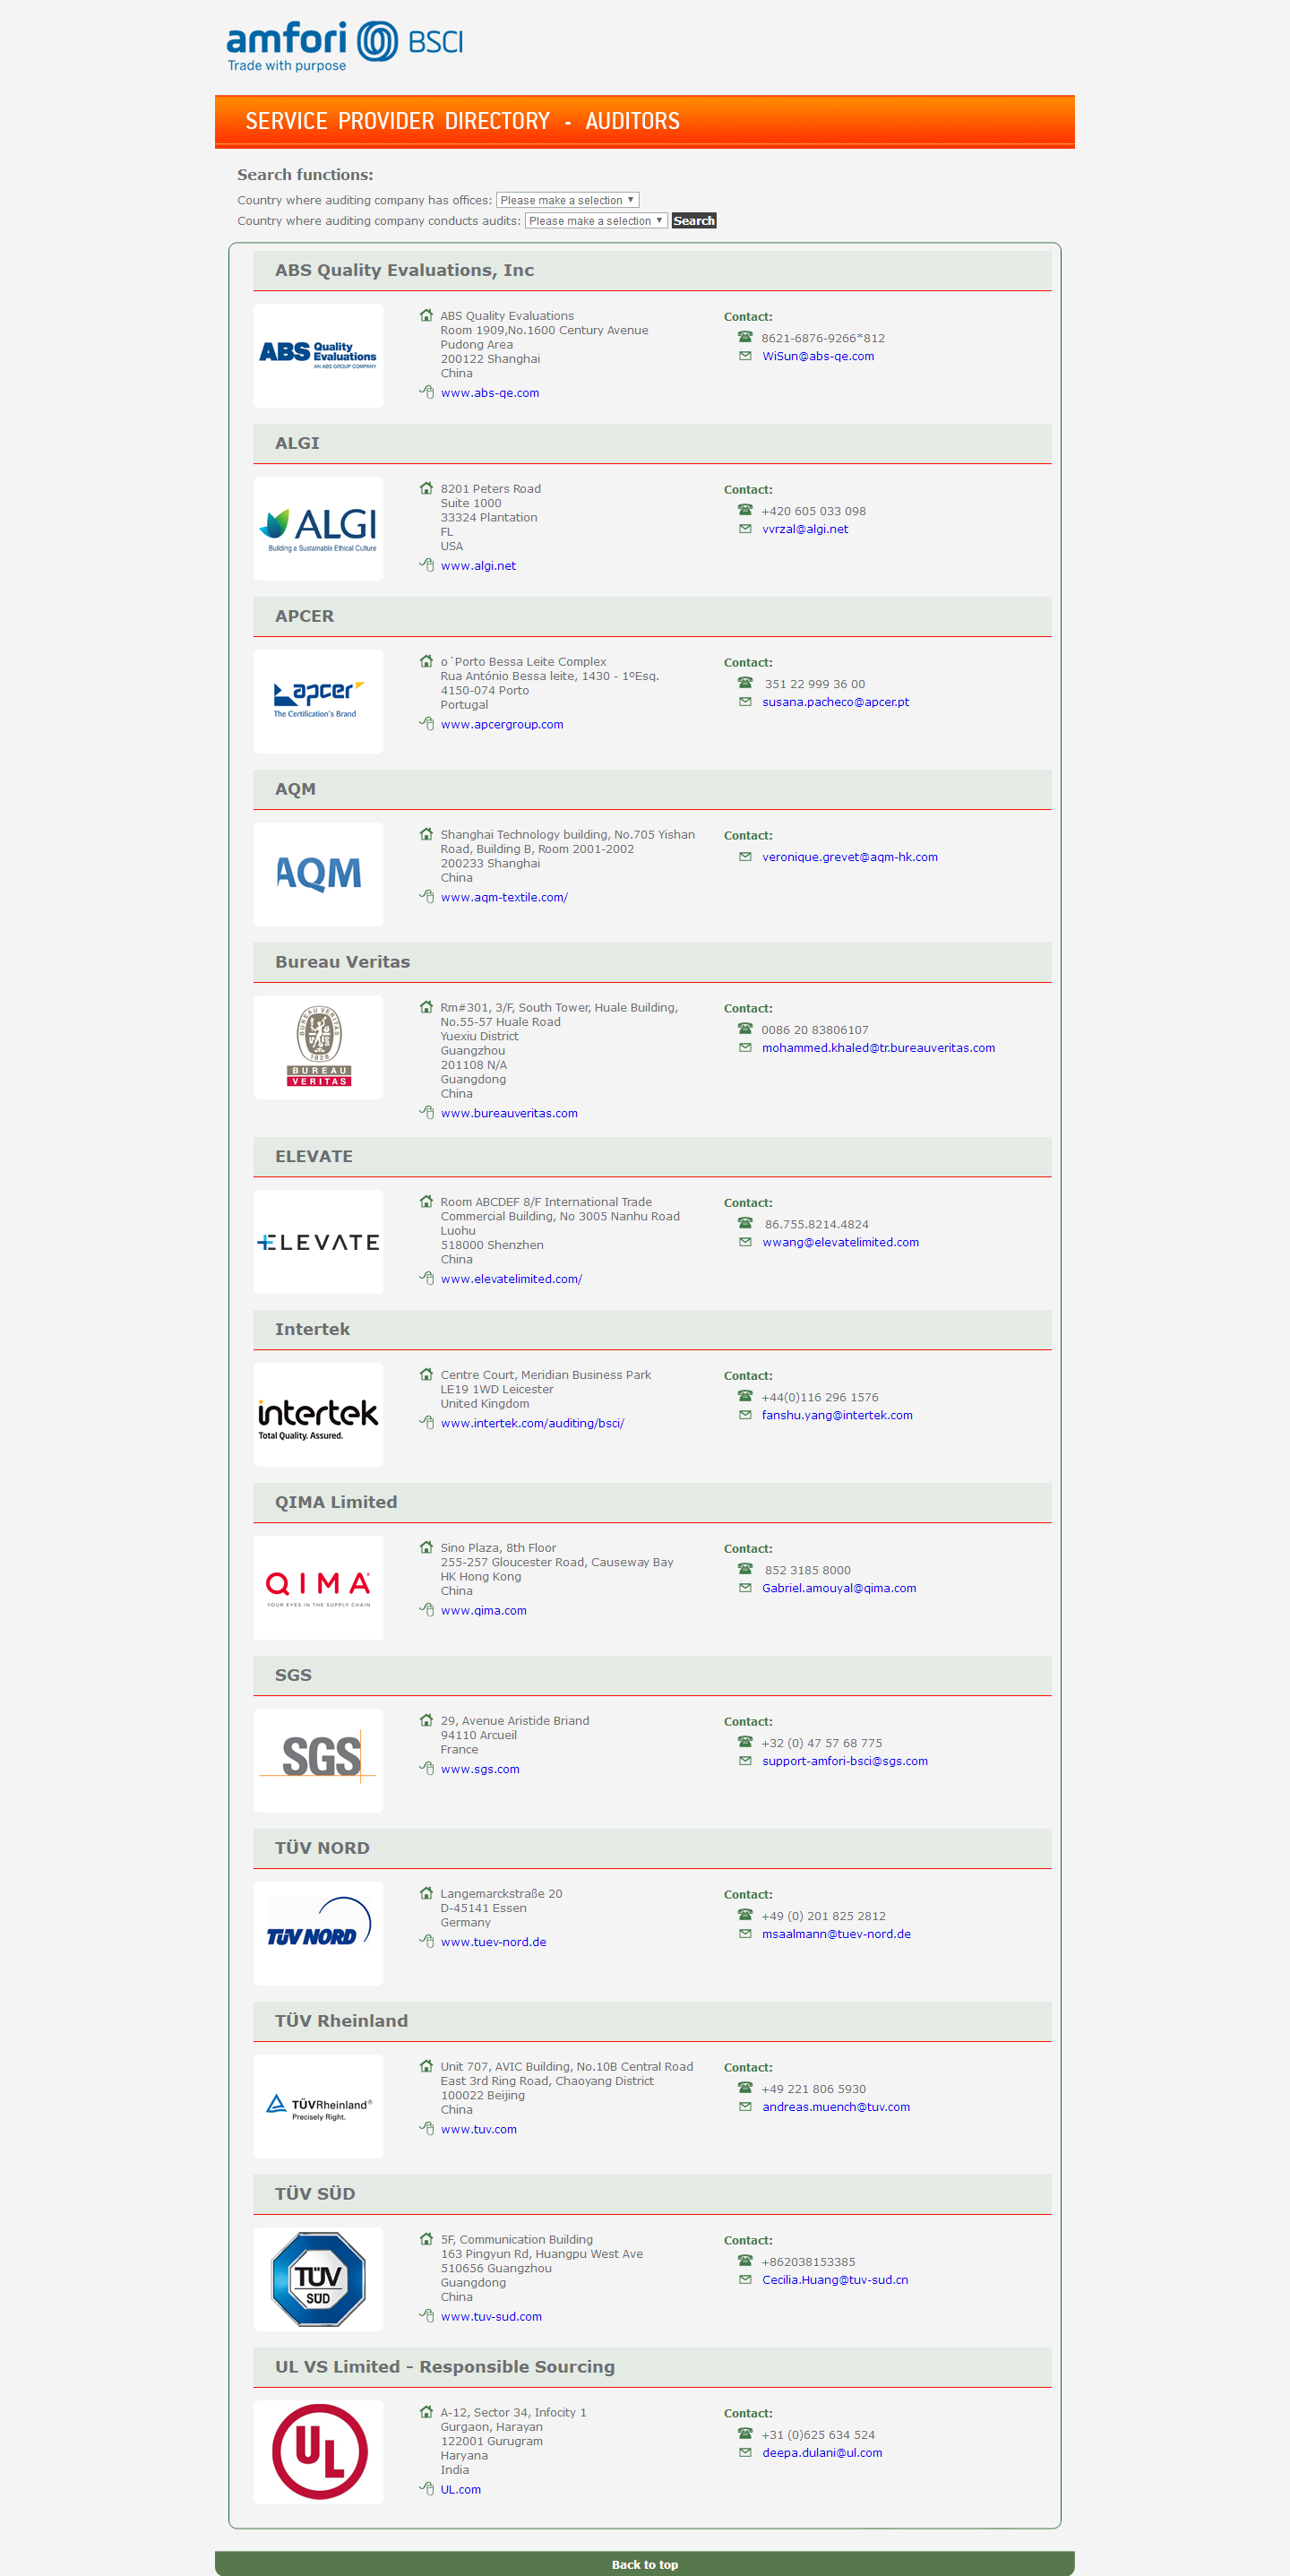 BSCI - Service Provider Directory - Auditors.png